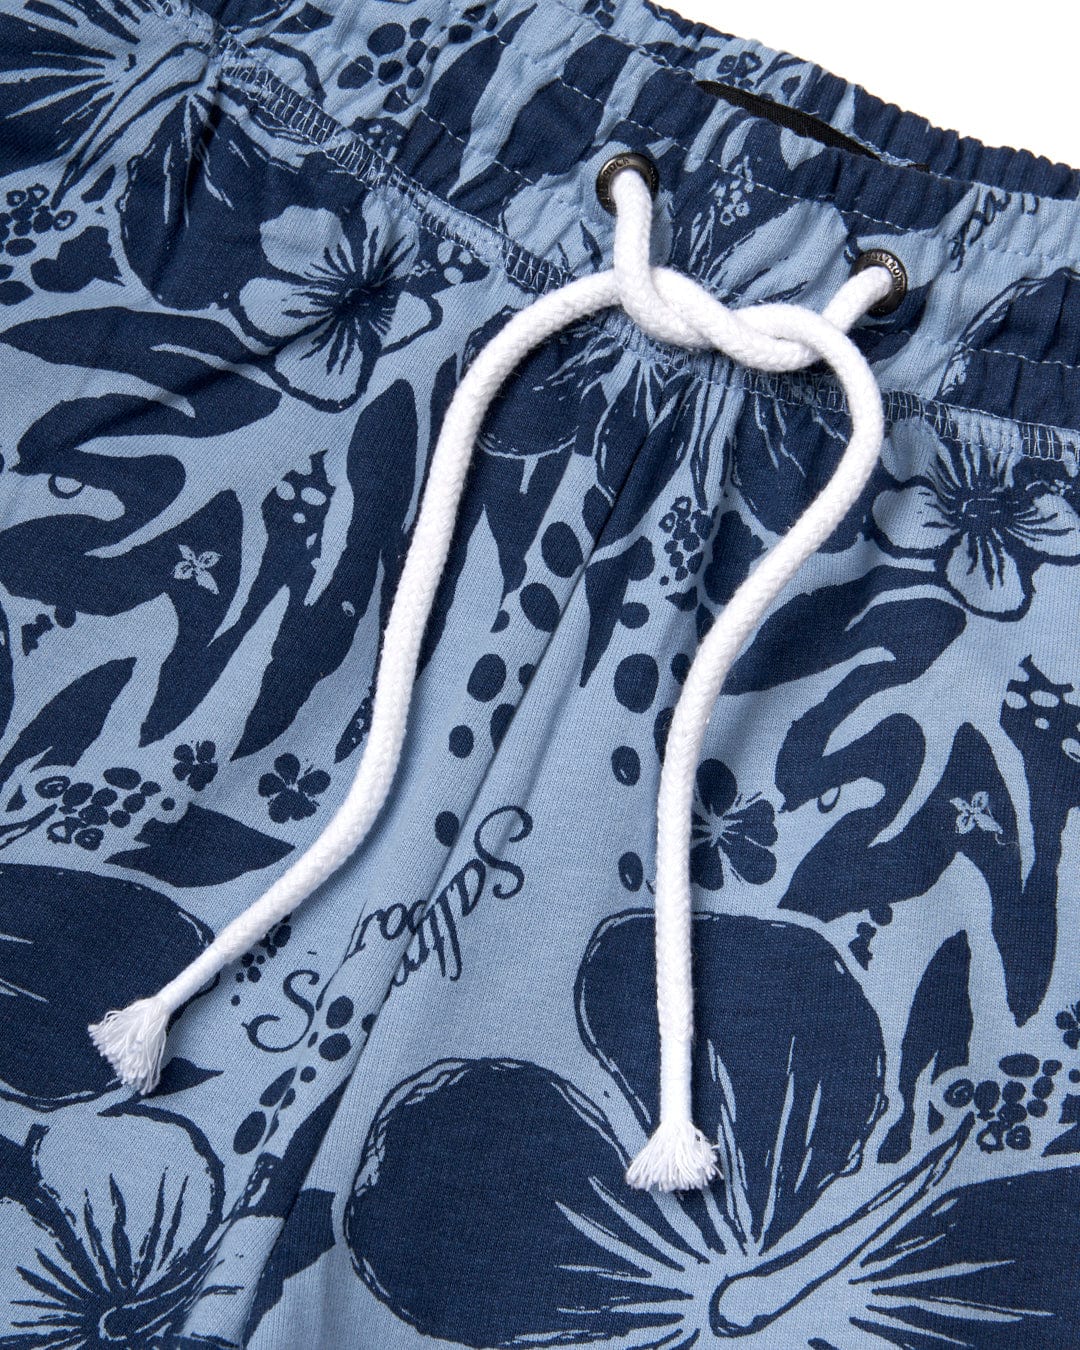 A blue and white Saltrock Soifra Hibiscus print swim trunks with an elasticated waist.